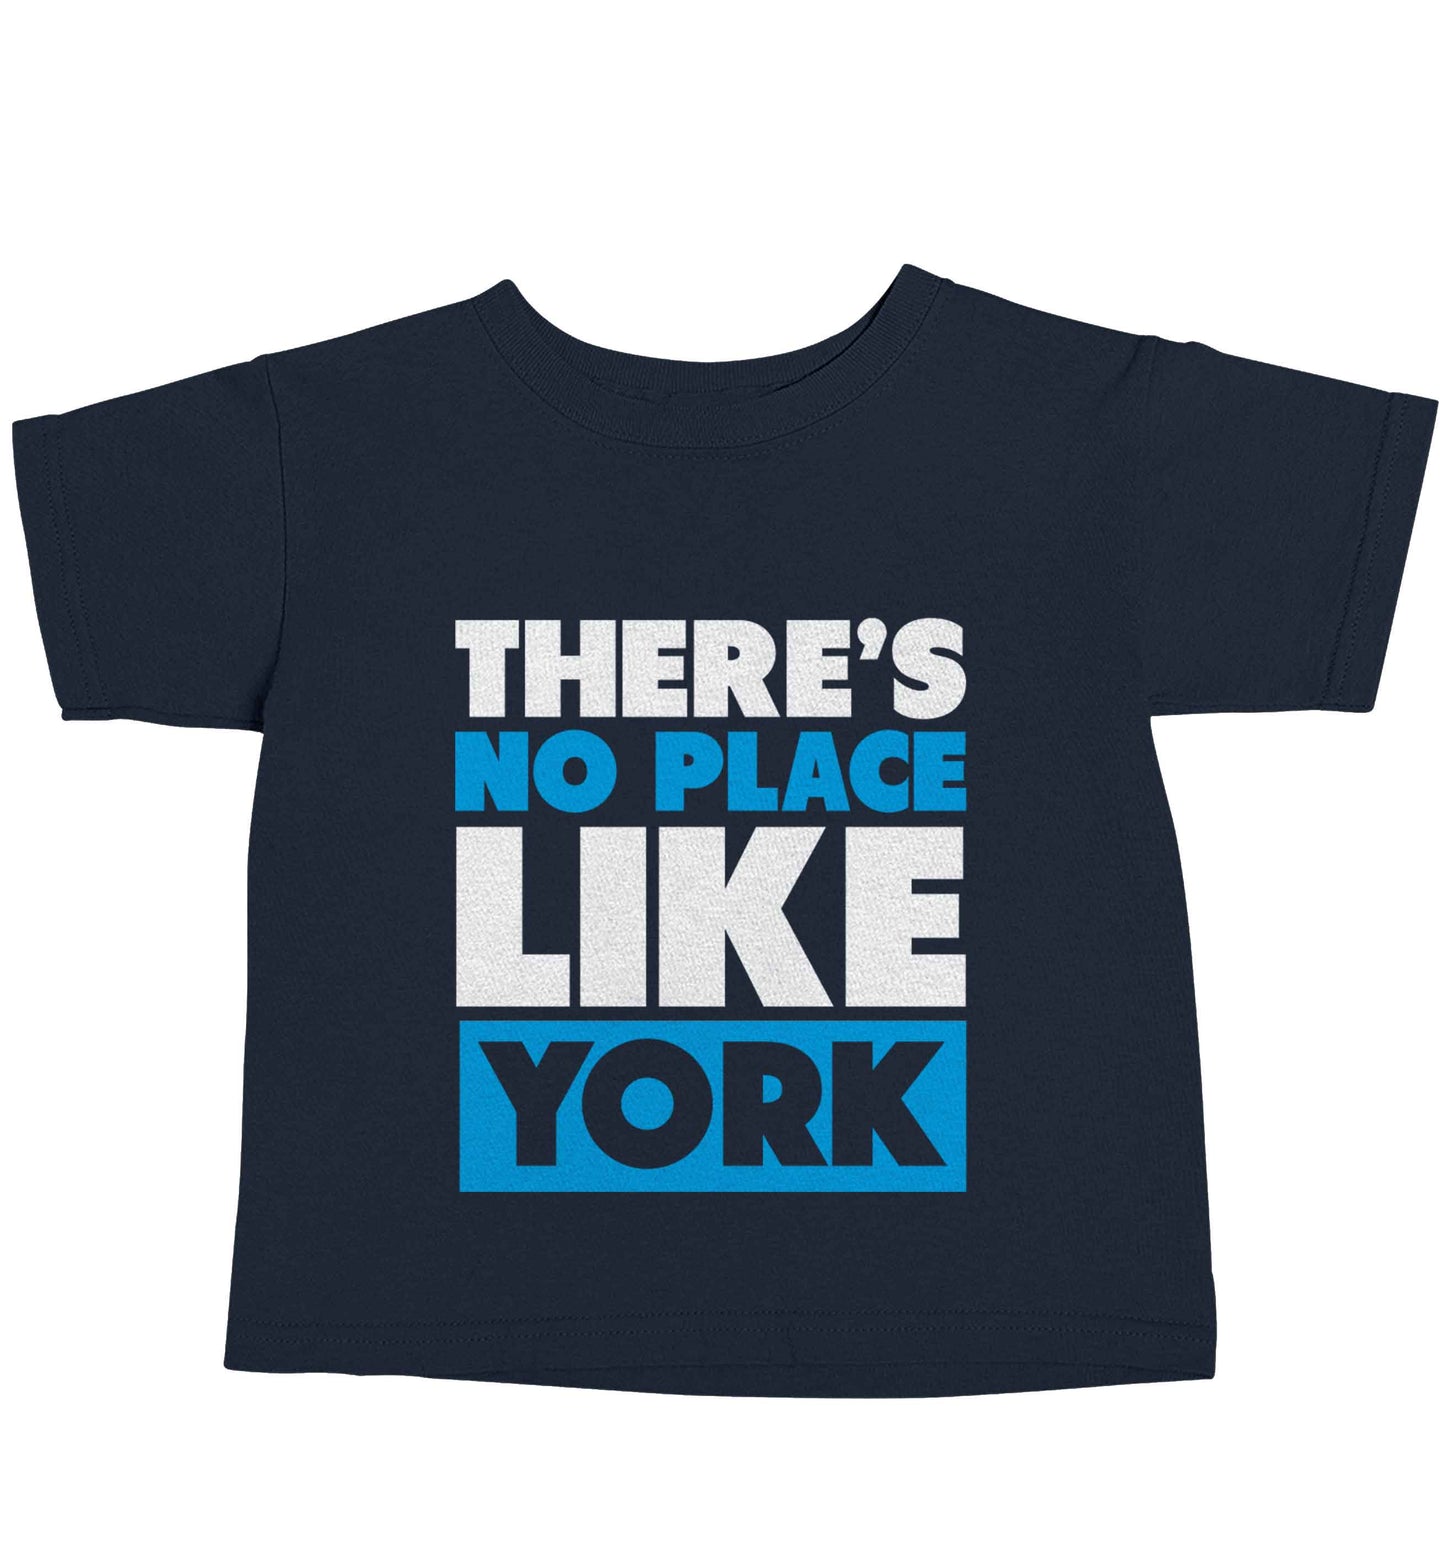 There's no place like york navy baby toddler Tshirt 2 Years